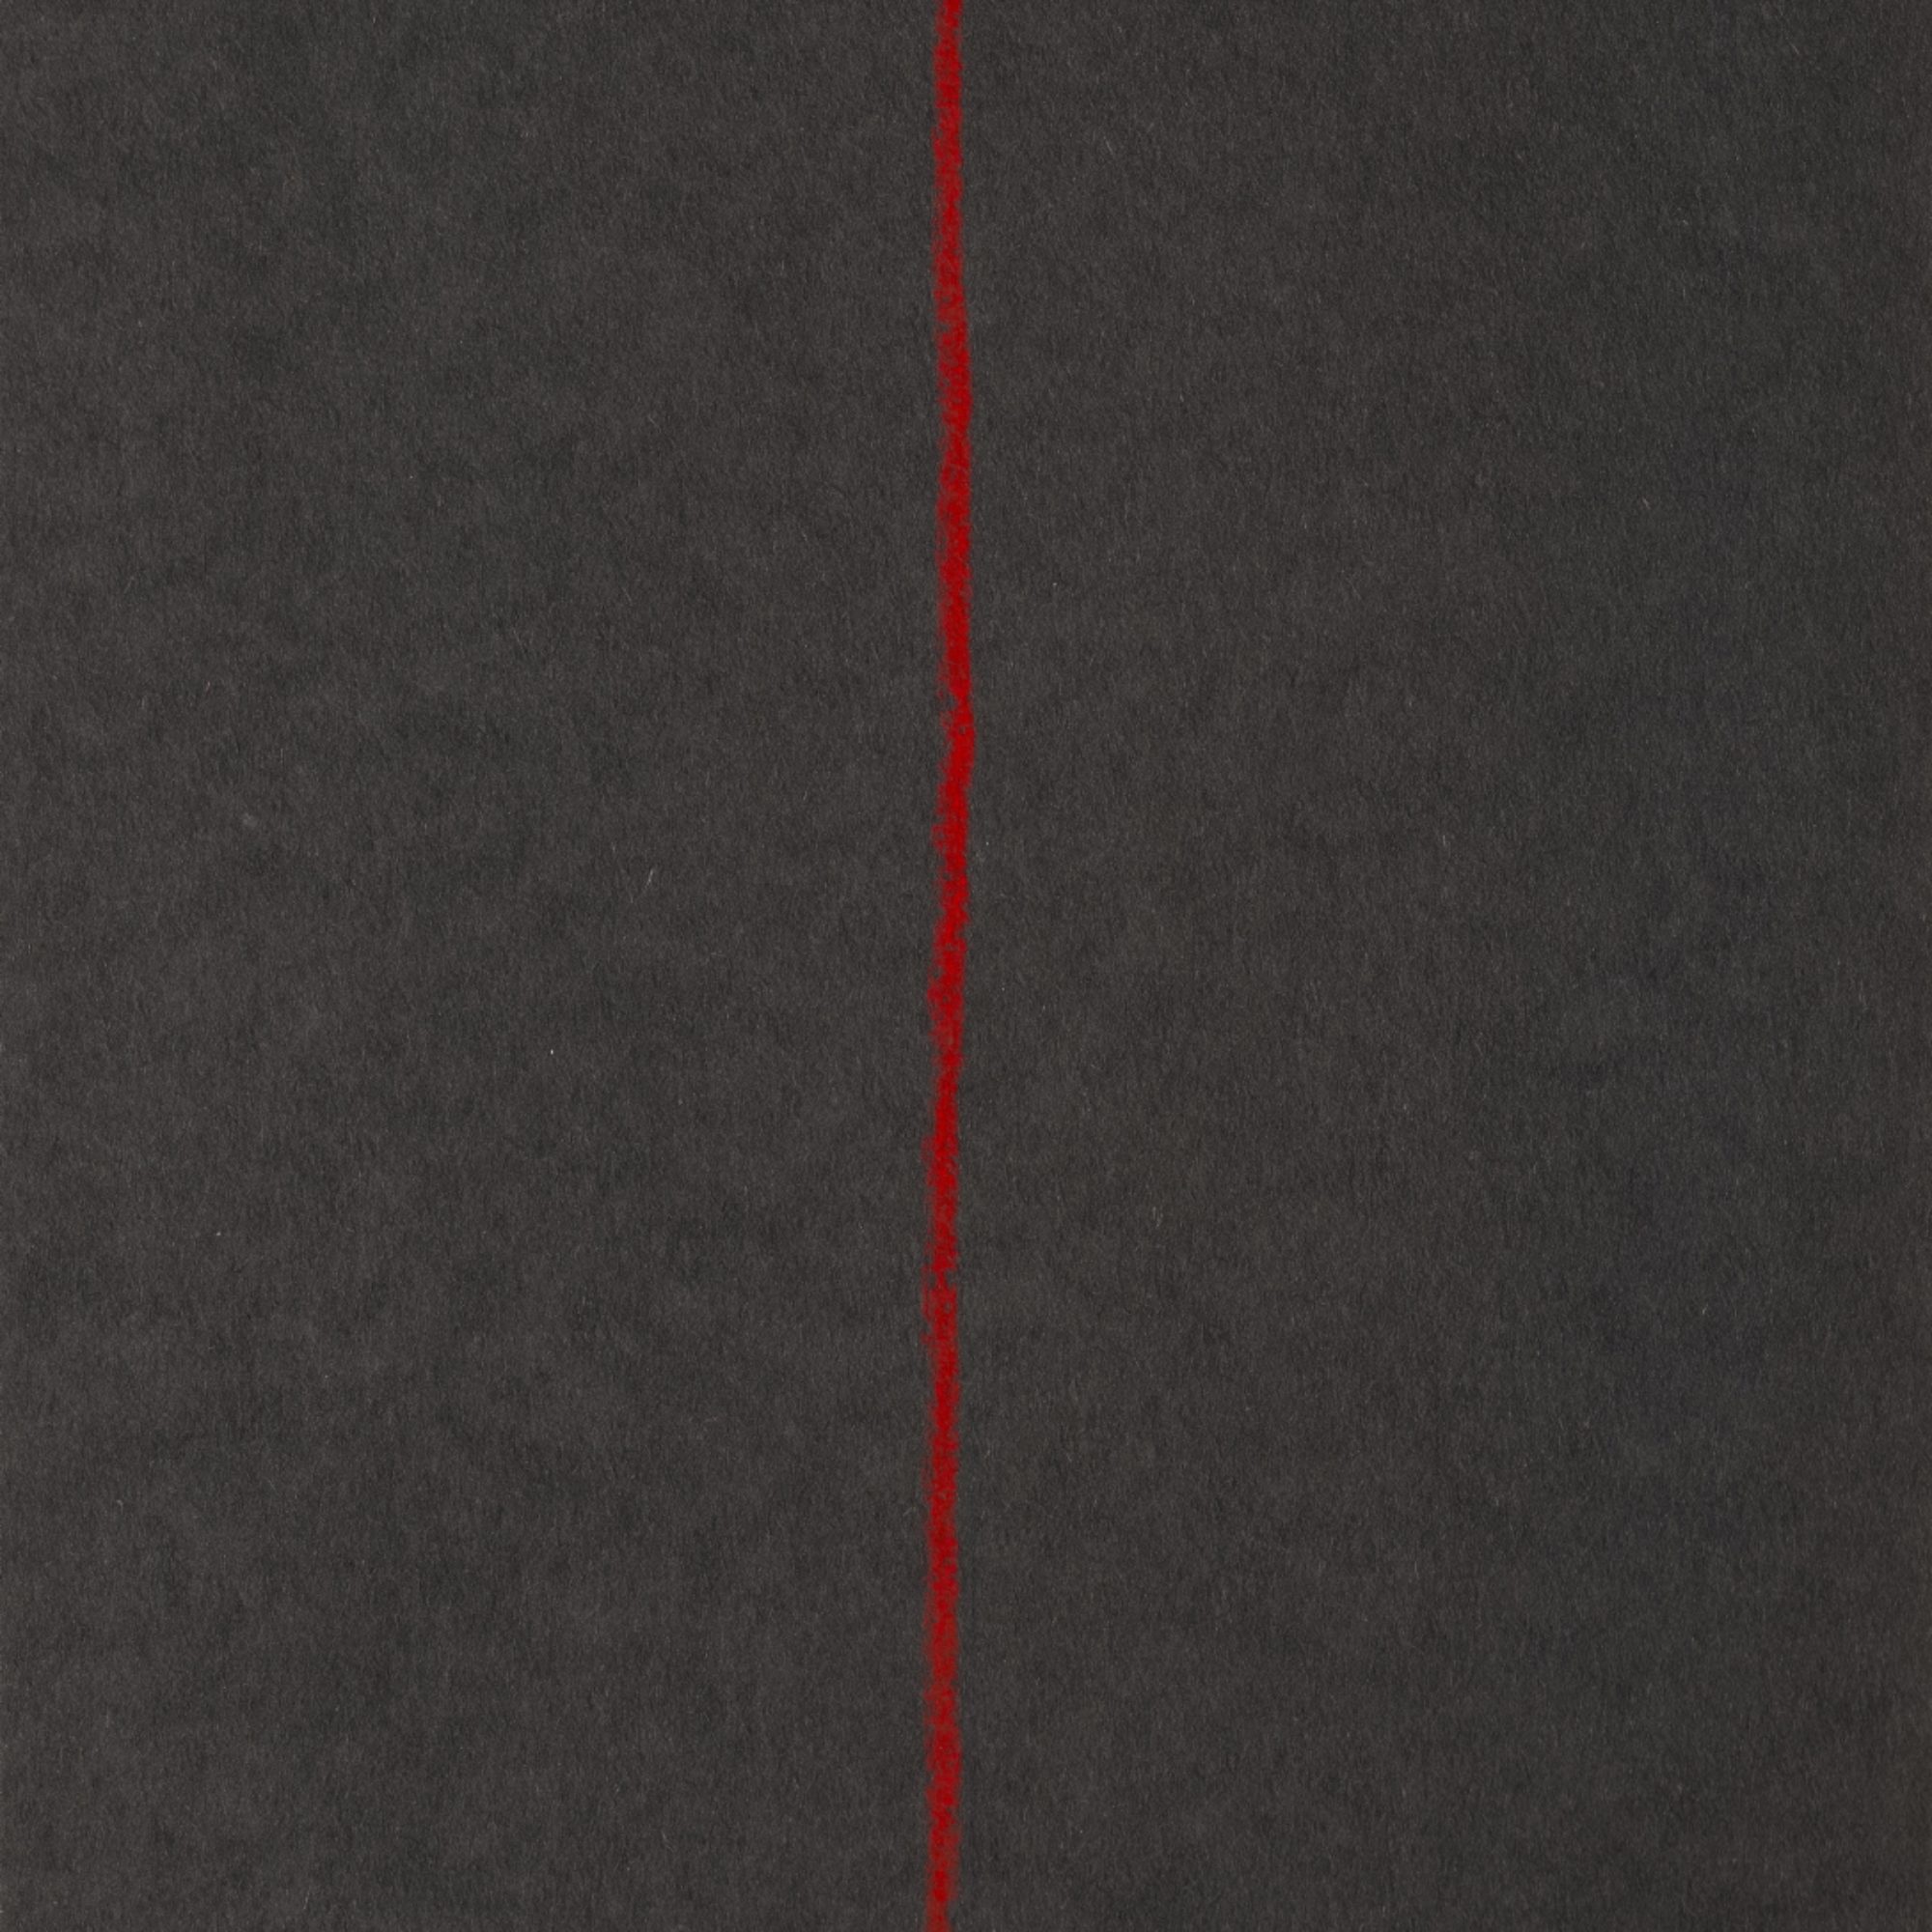 Black construction paper with a red vertical line in pastel